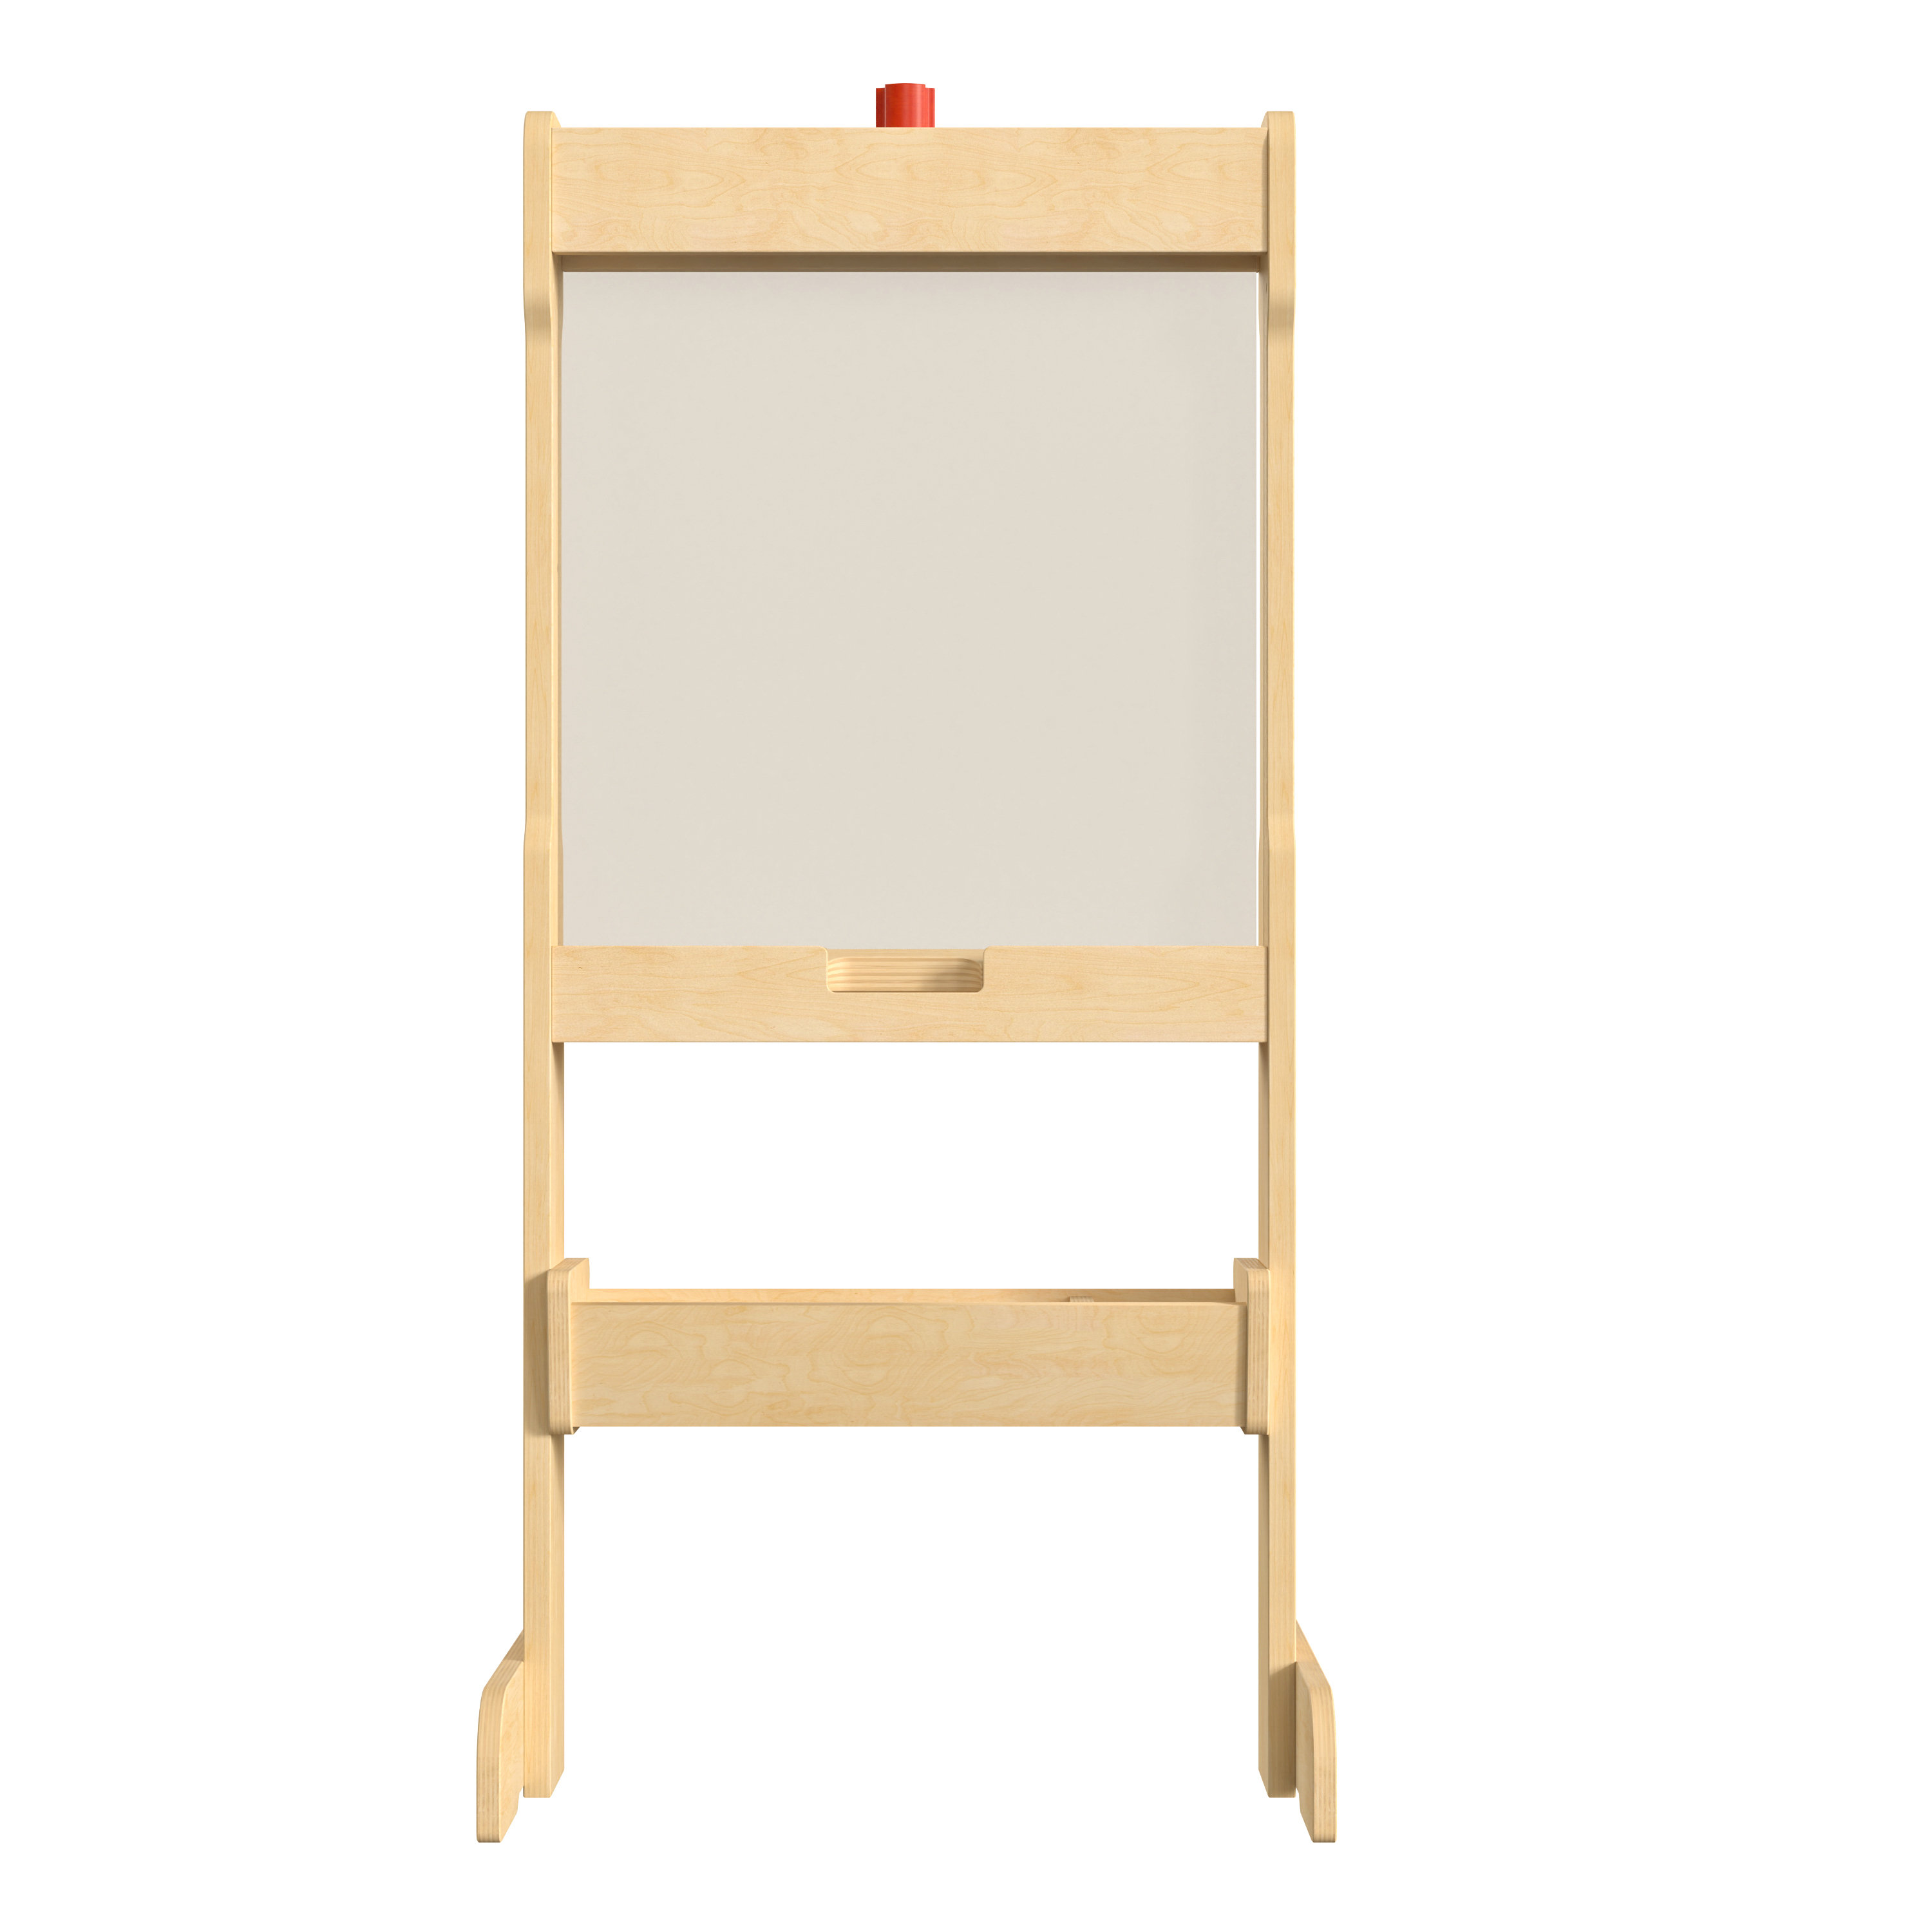 Artists Drawing Boards: Wooden & Free Standing